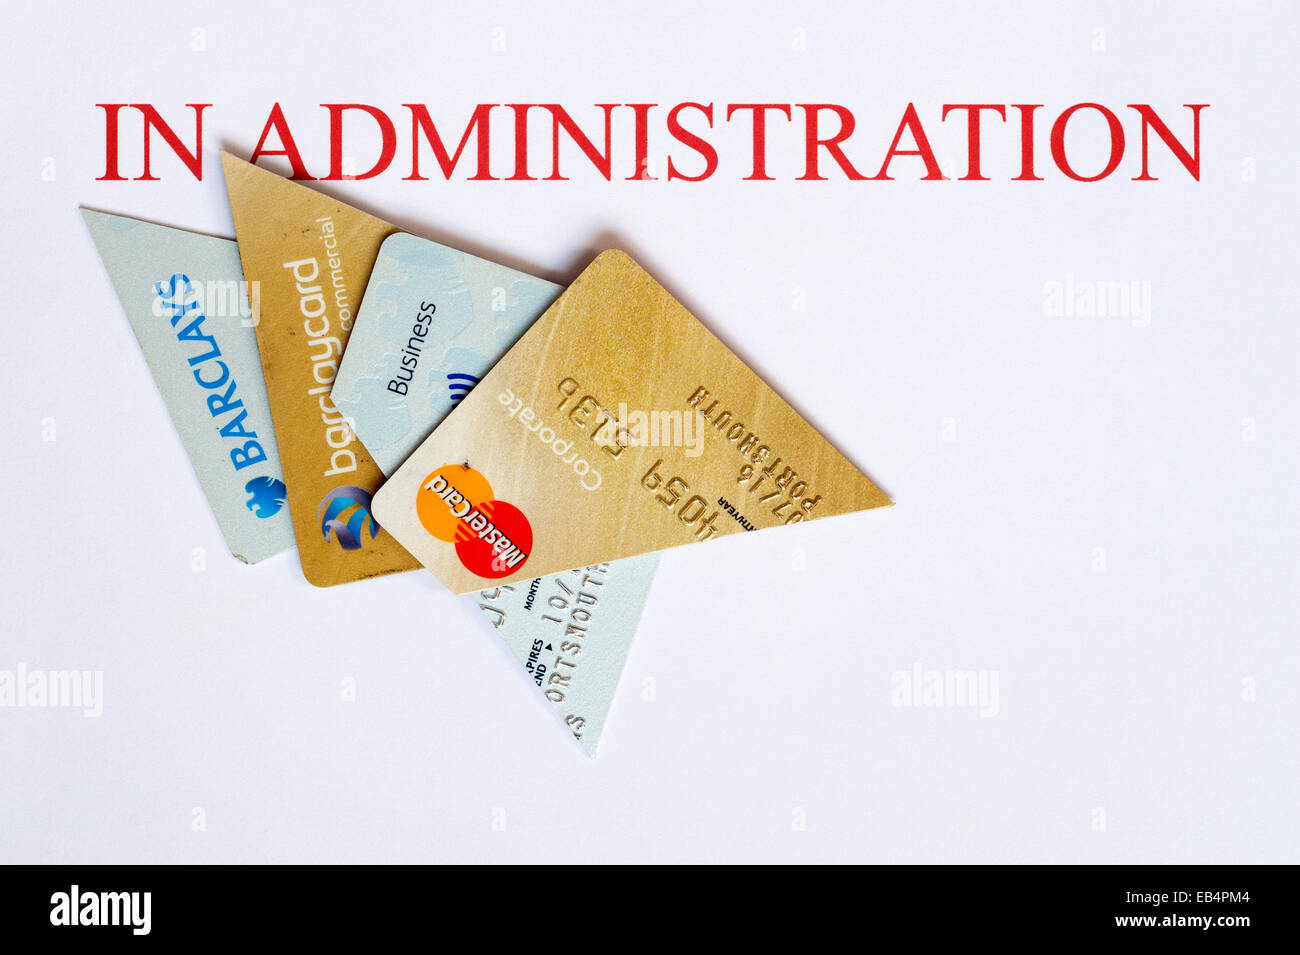 cut up business credit and bank cards on a letterhead of in administration Stock Photo